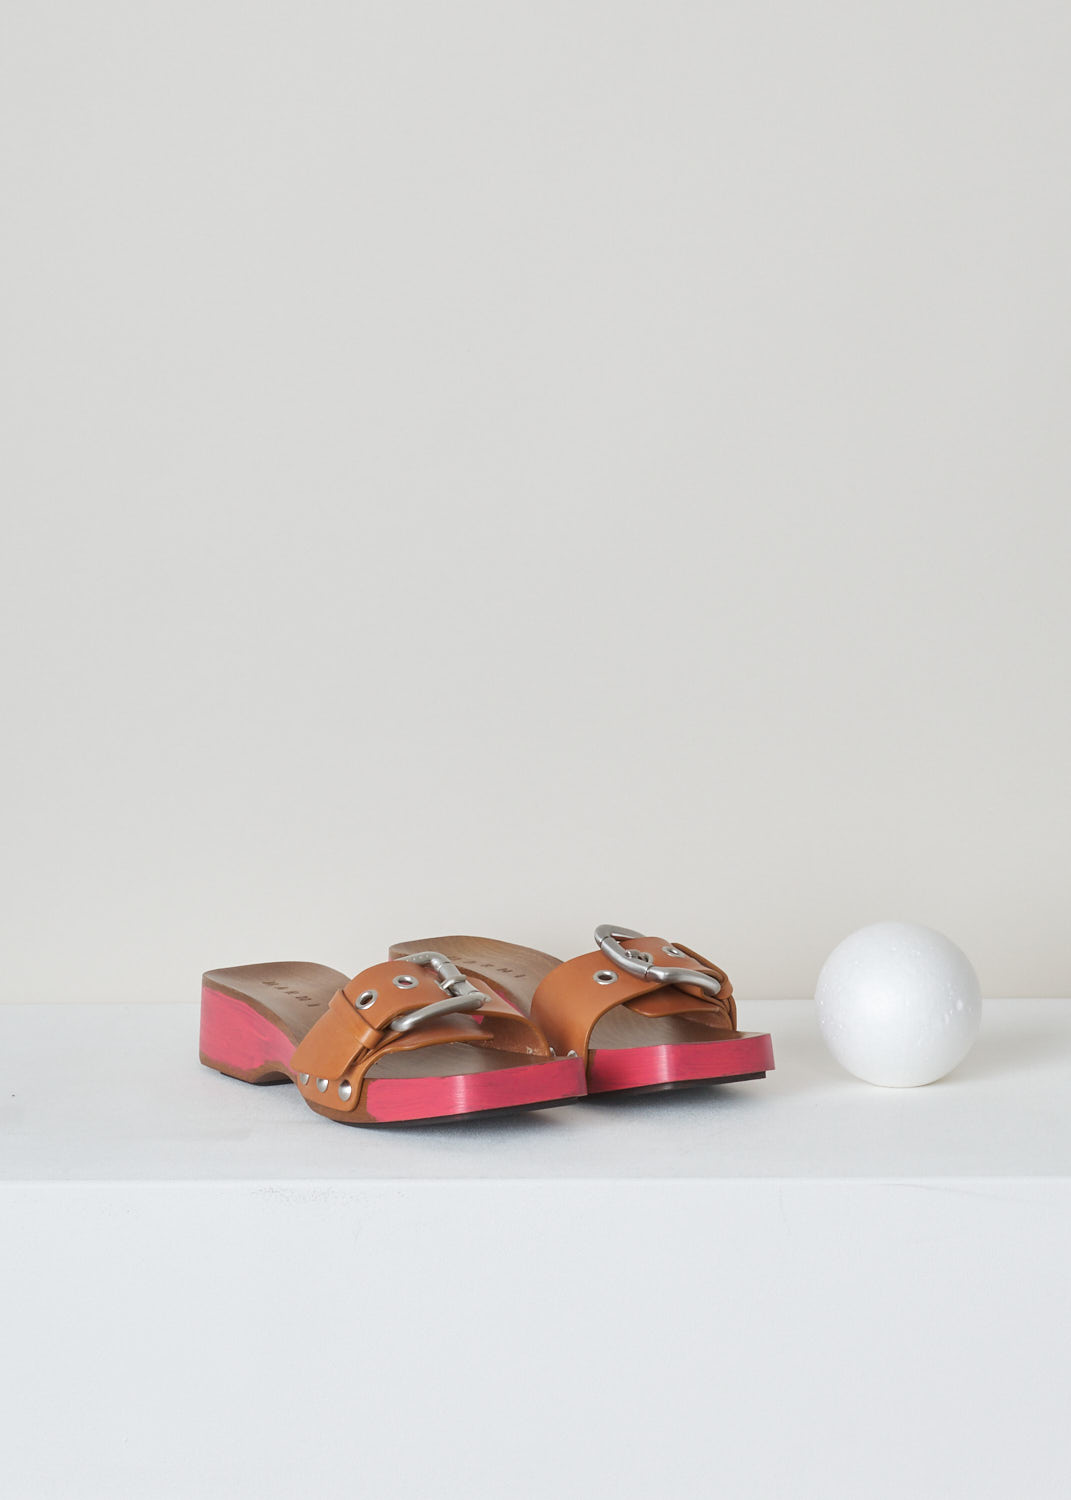 Marni, Red single-strap sandal with metal buckle, ZCMS000204_P3386_00M23, red, front, These one-band sandals have a metal buckle. The red coloration on the sides of these sandals are all hand painted and come with square cut toes.